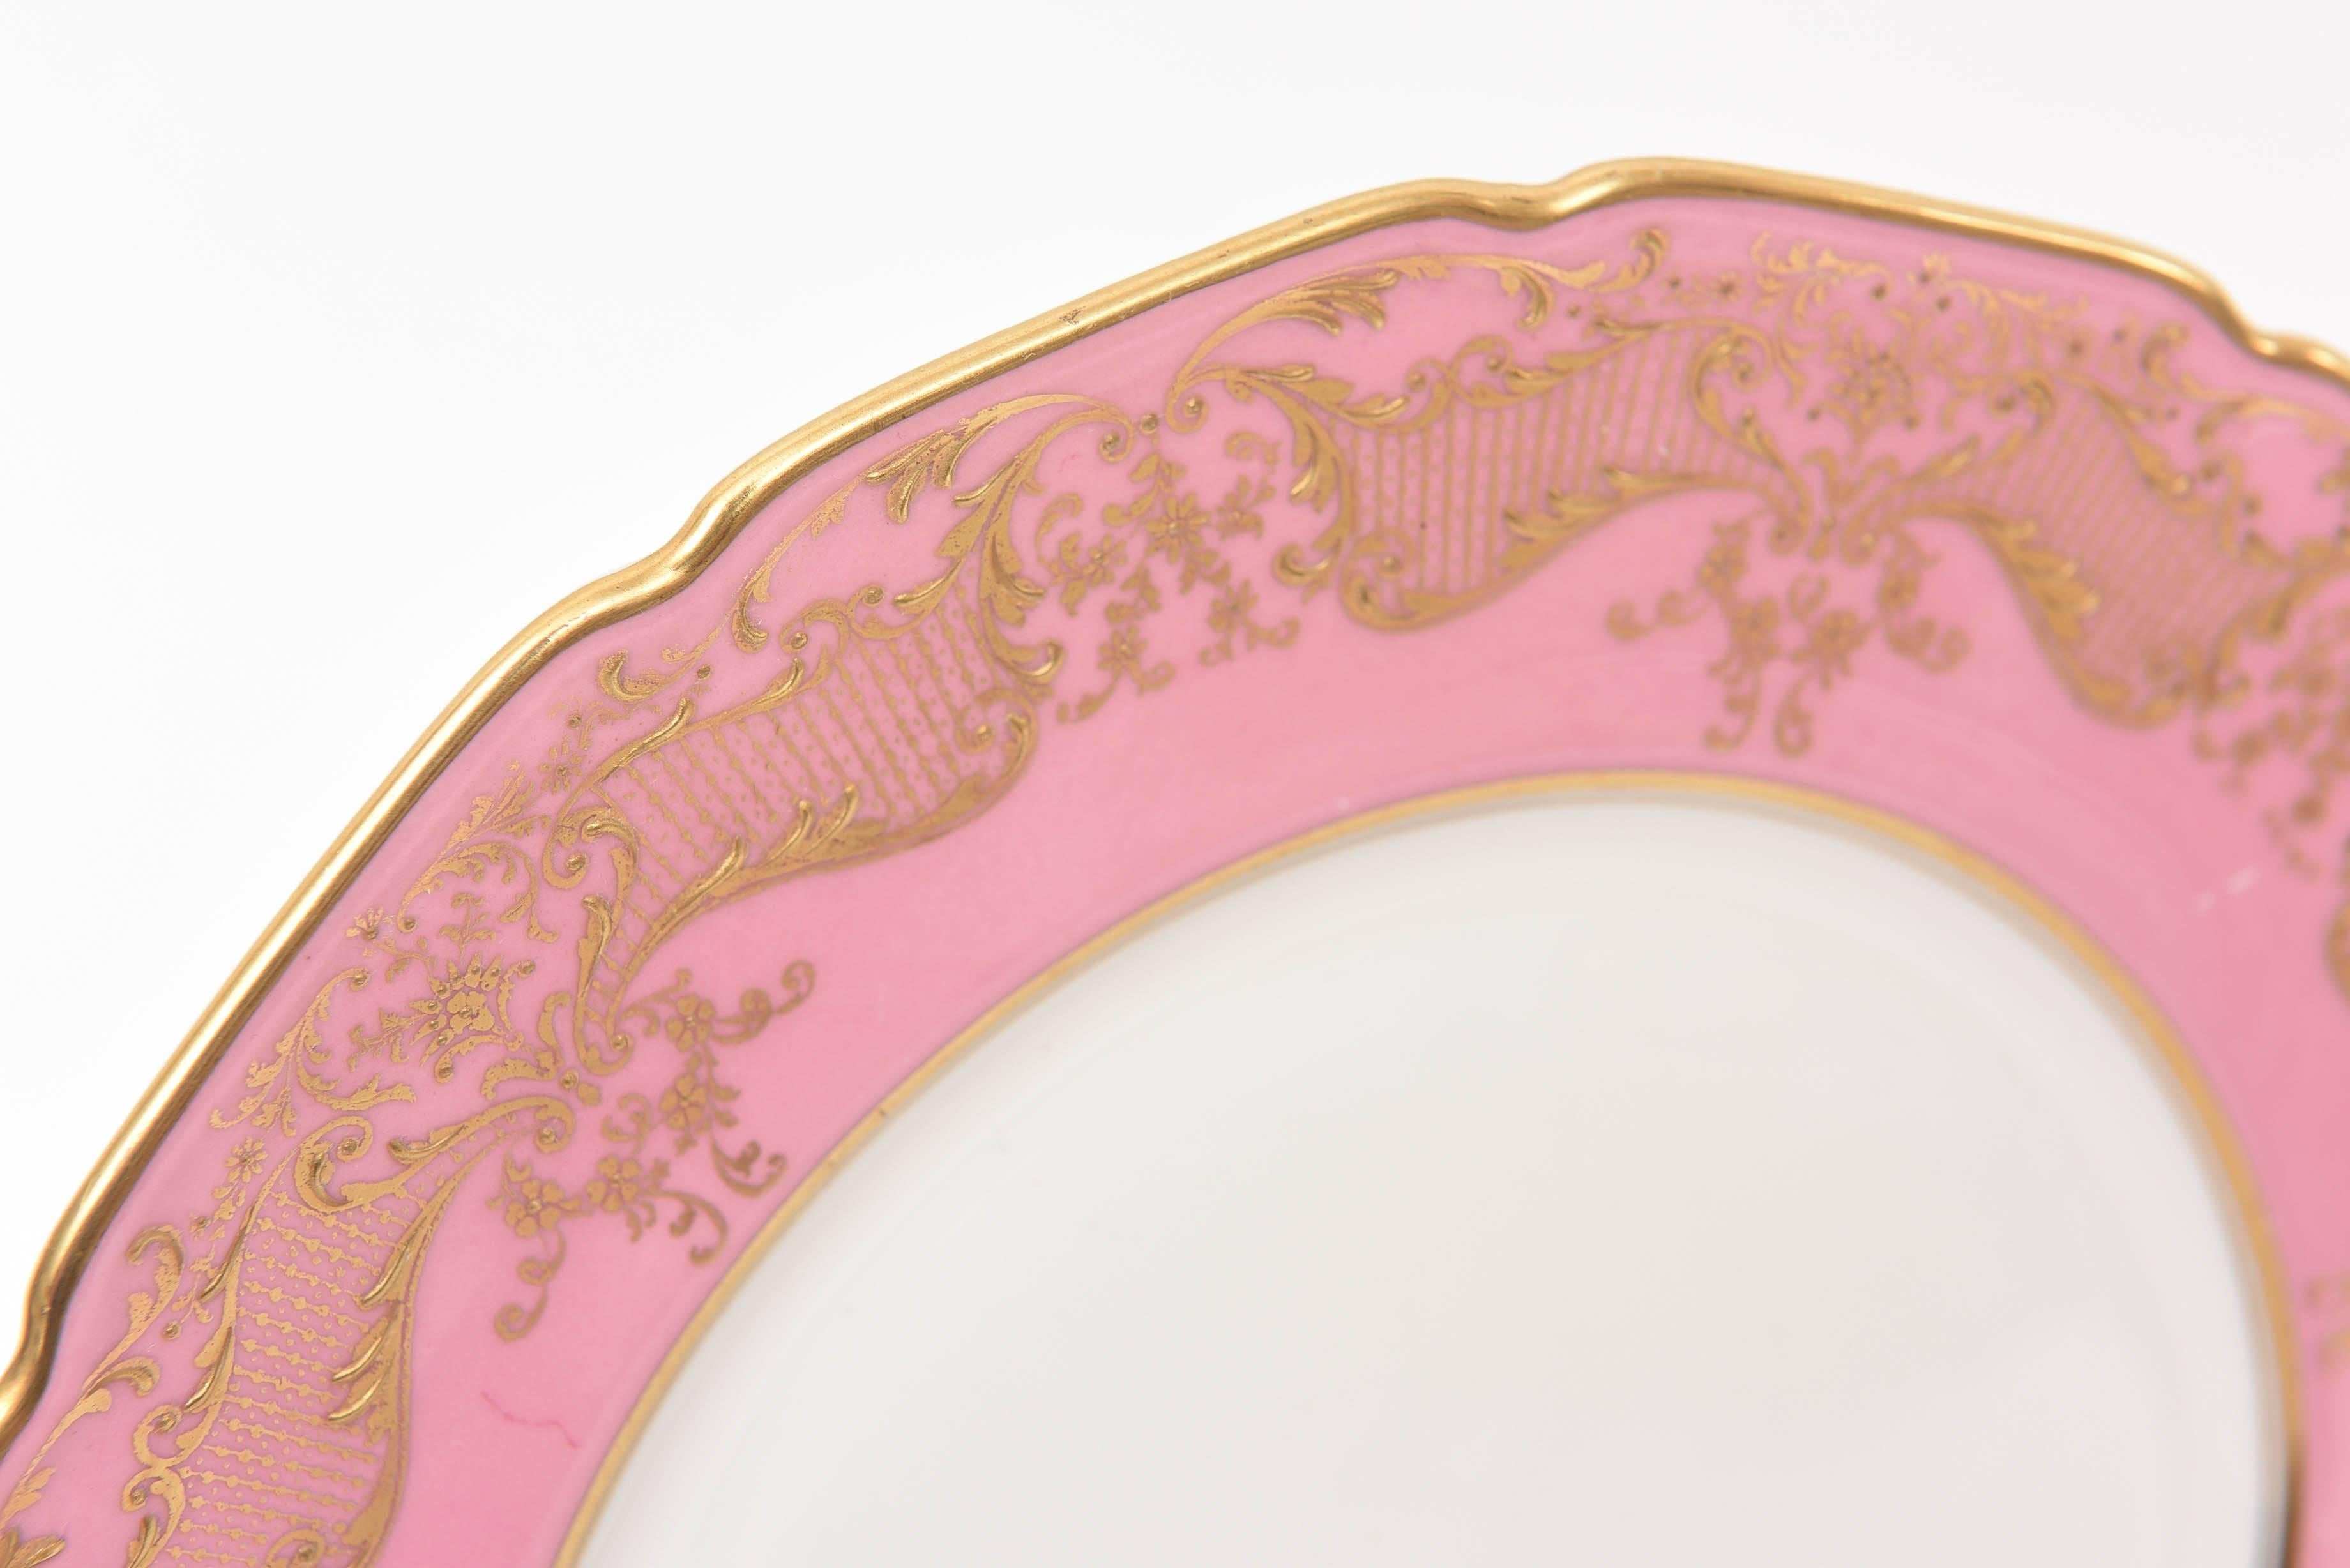 12 Antique Dinner Plates With Raised Gold On Pink Royal Doulton